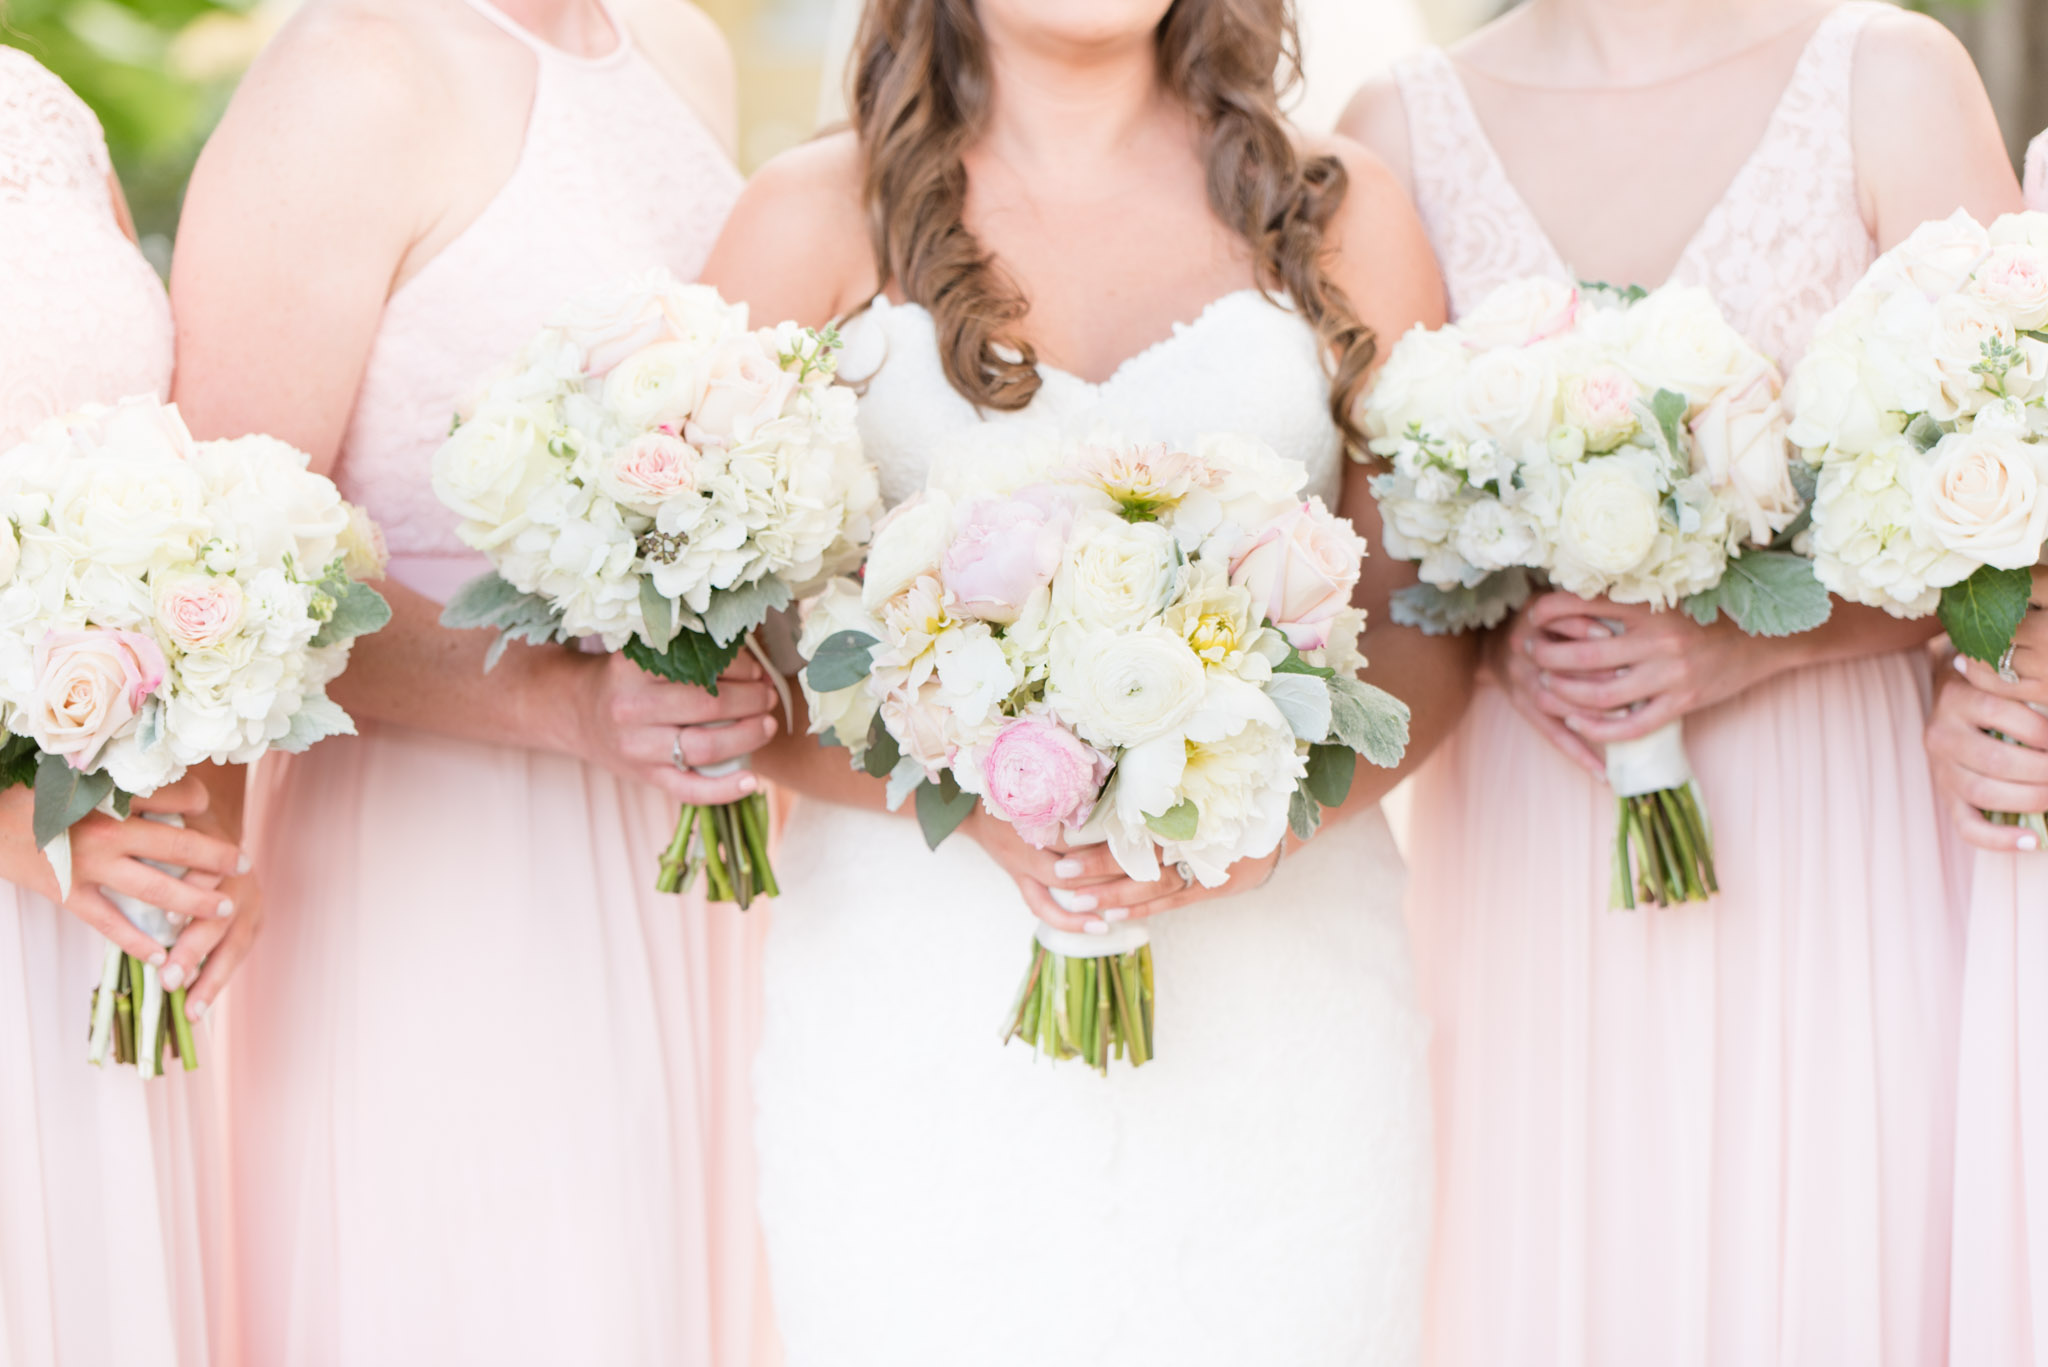 Bride and bridesmaids hold bouquets.